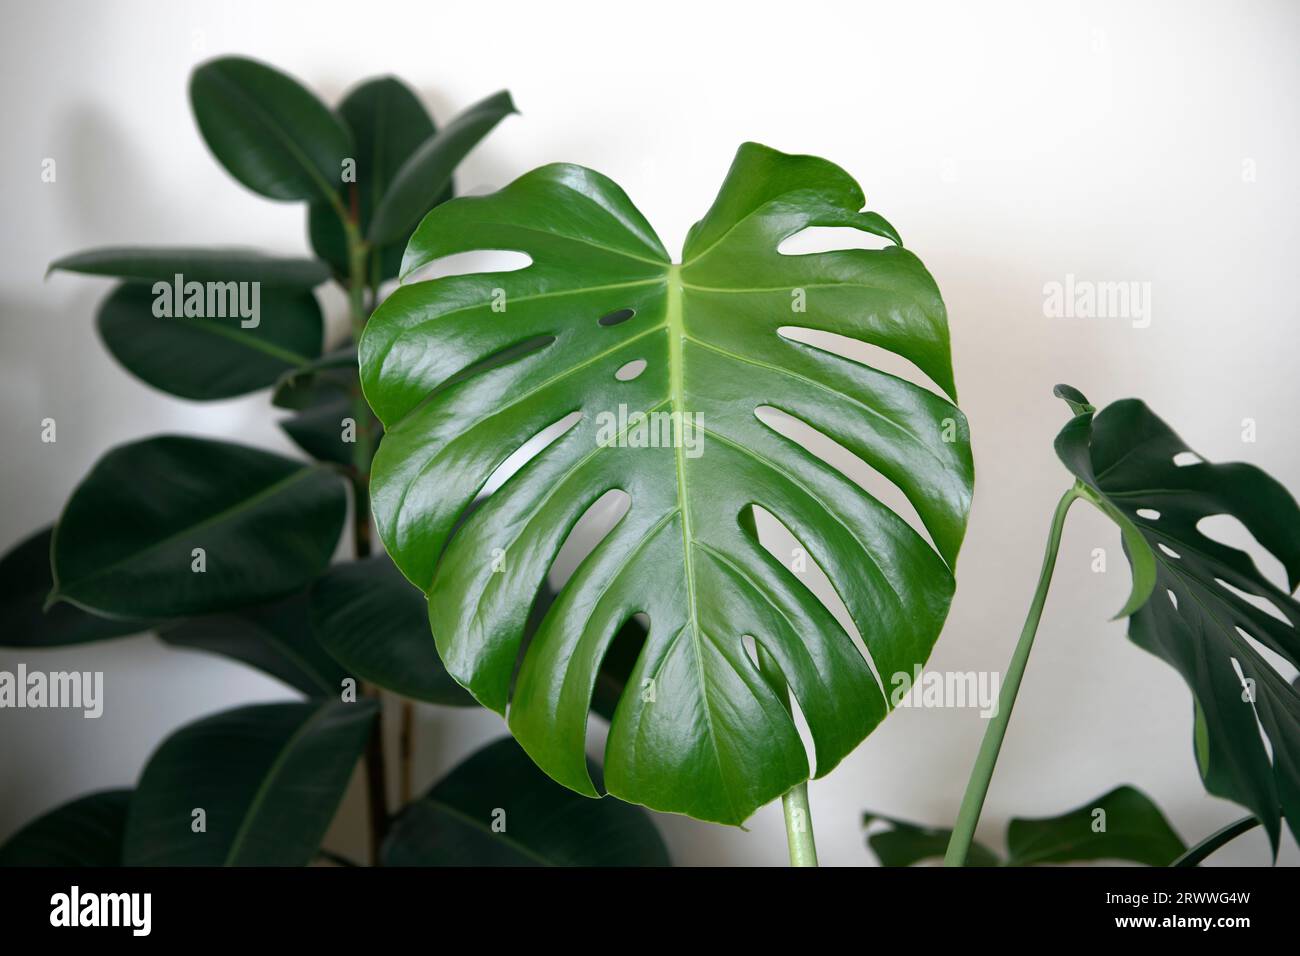 Monstera plant in pot close-up, potted monstera houseplant, big green shiny leaf. Stock Photo